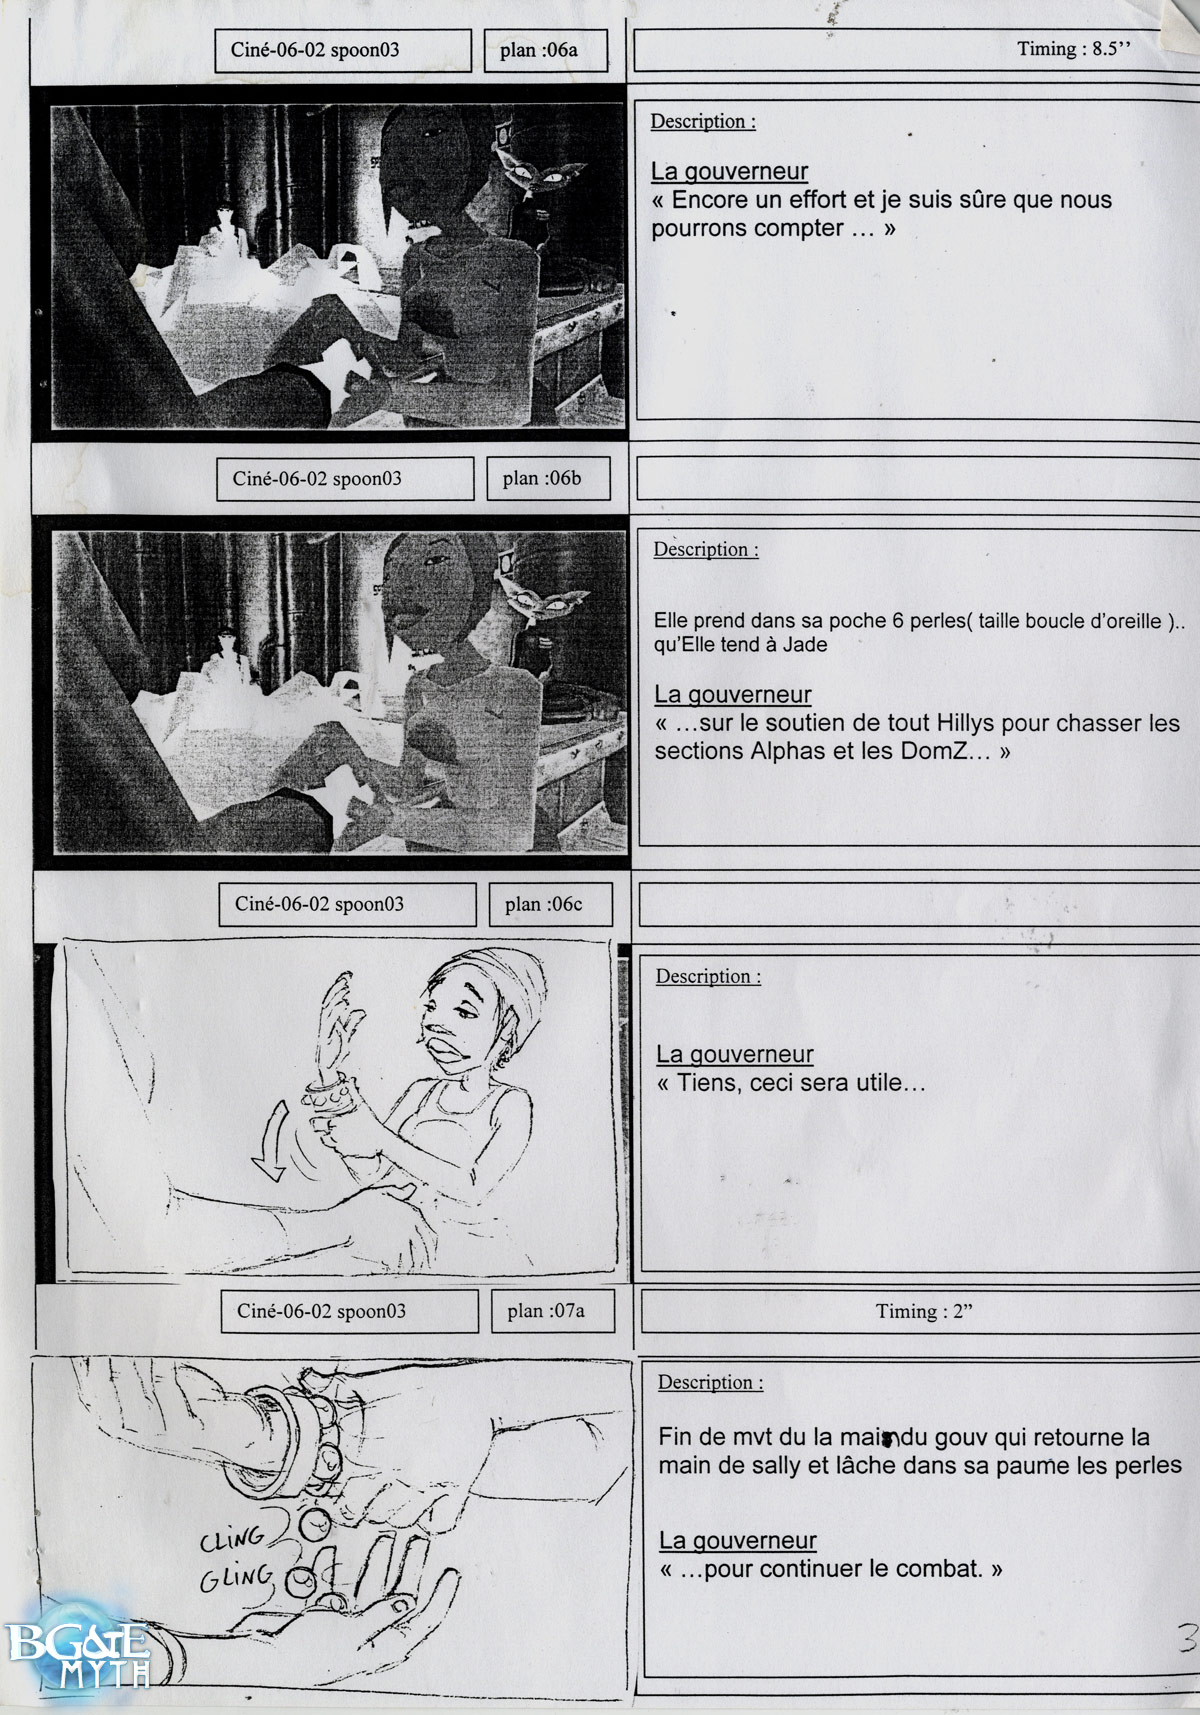 [Storyboard] Marcassin appelle IRIS - Page 3